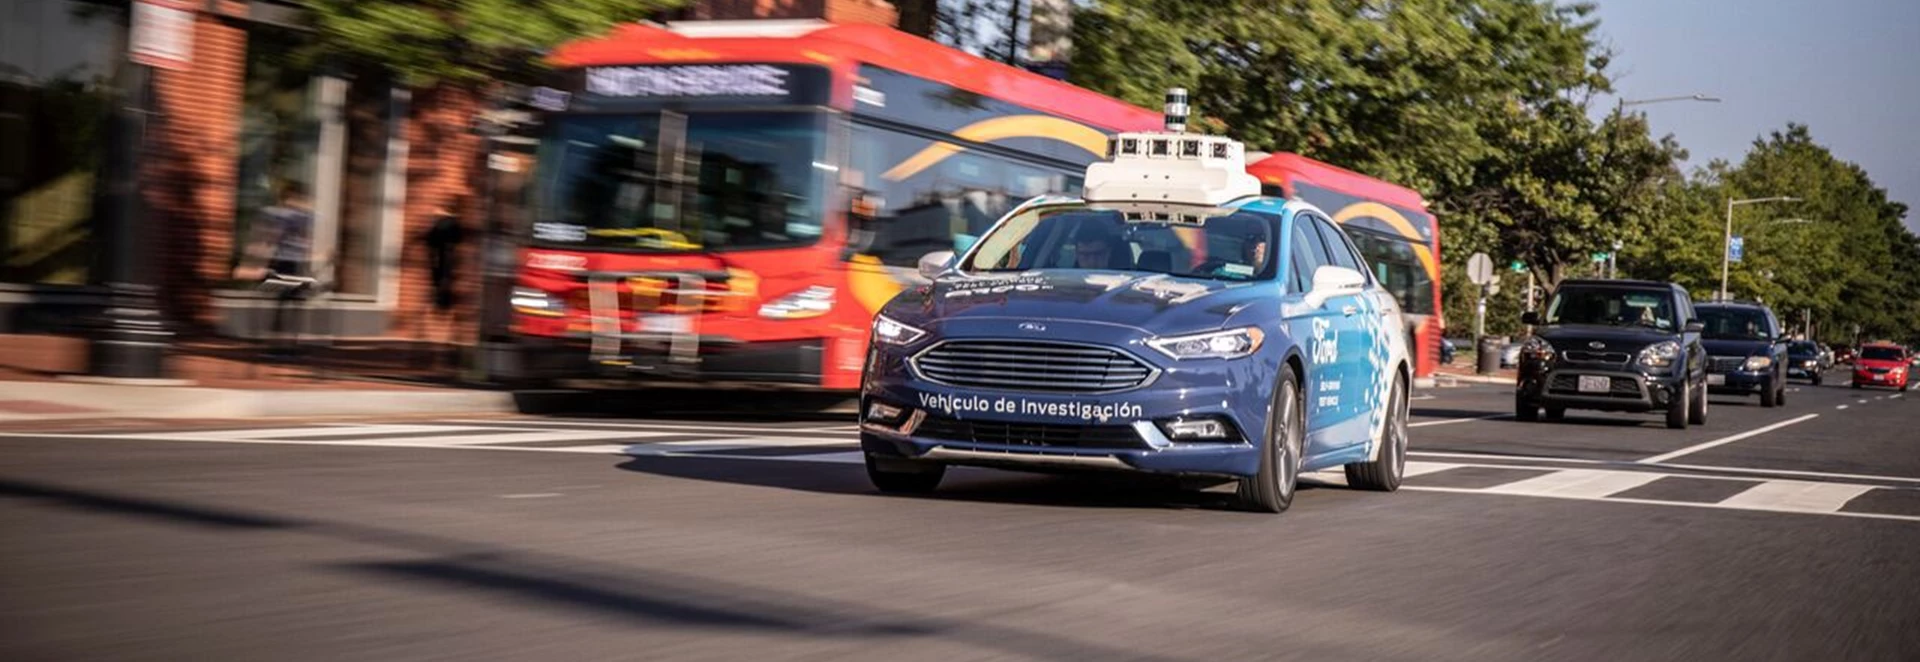 Ford to test self-driving cars in Washington D.C.